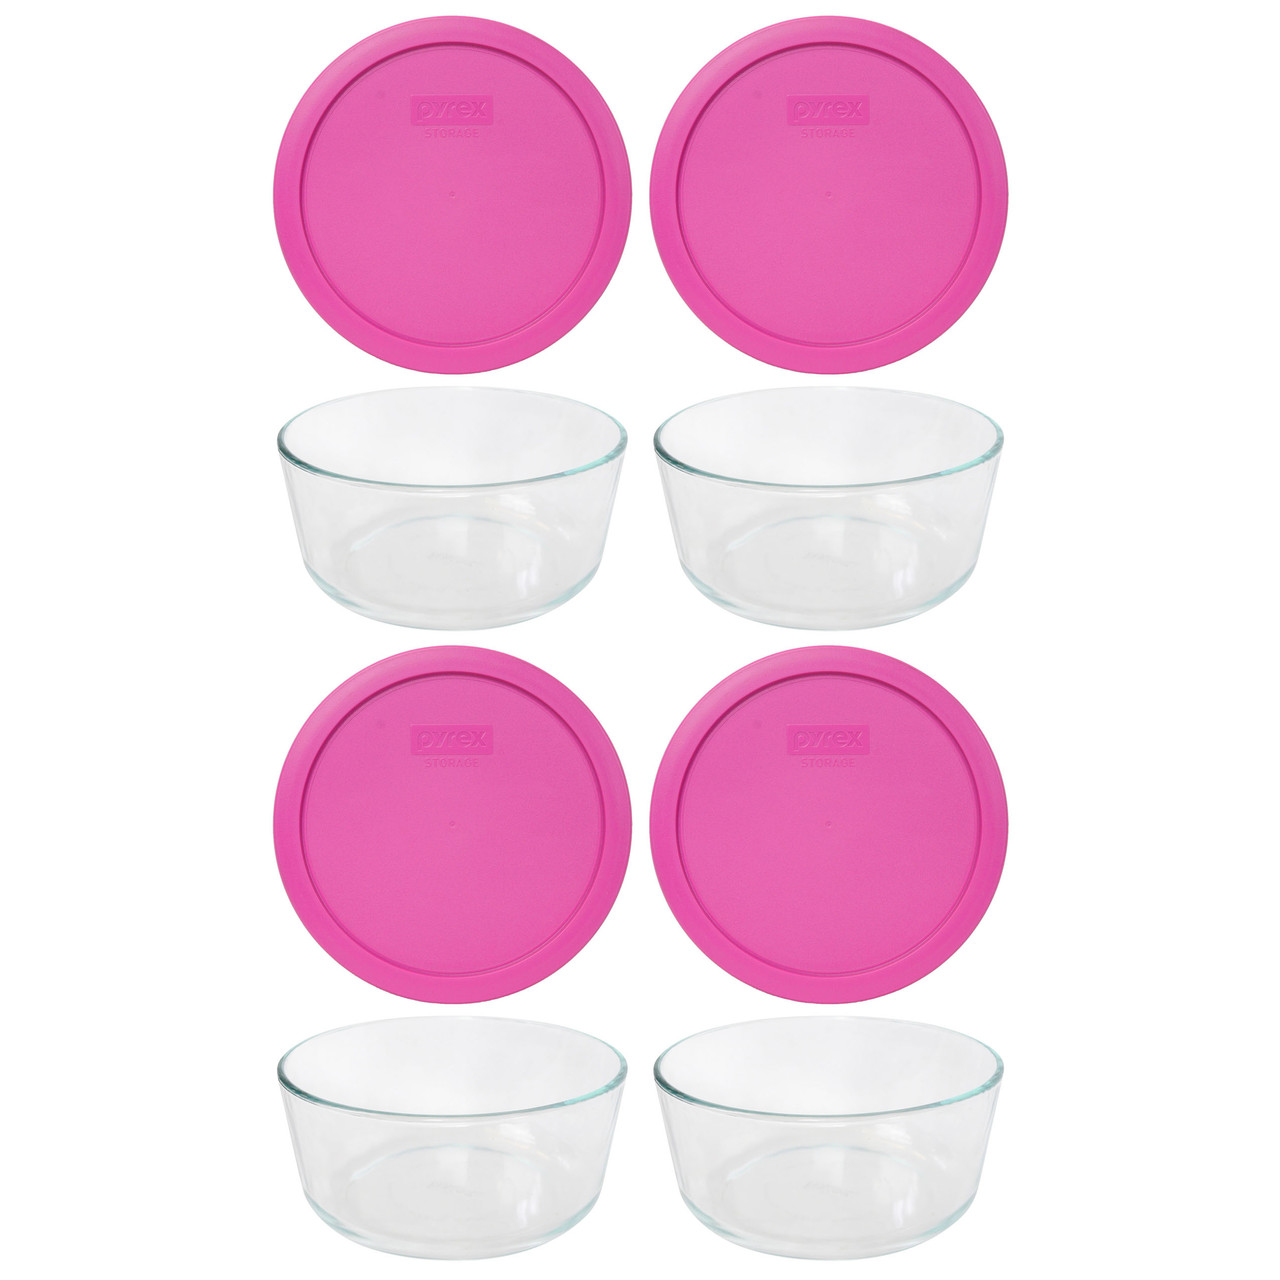 Pyrex 7203 7-Cup Round Glass Food Storage Bowl w/ 7402-PC Pink Plastic Lid Cover (4-Pack)